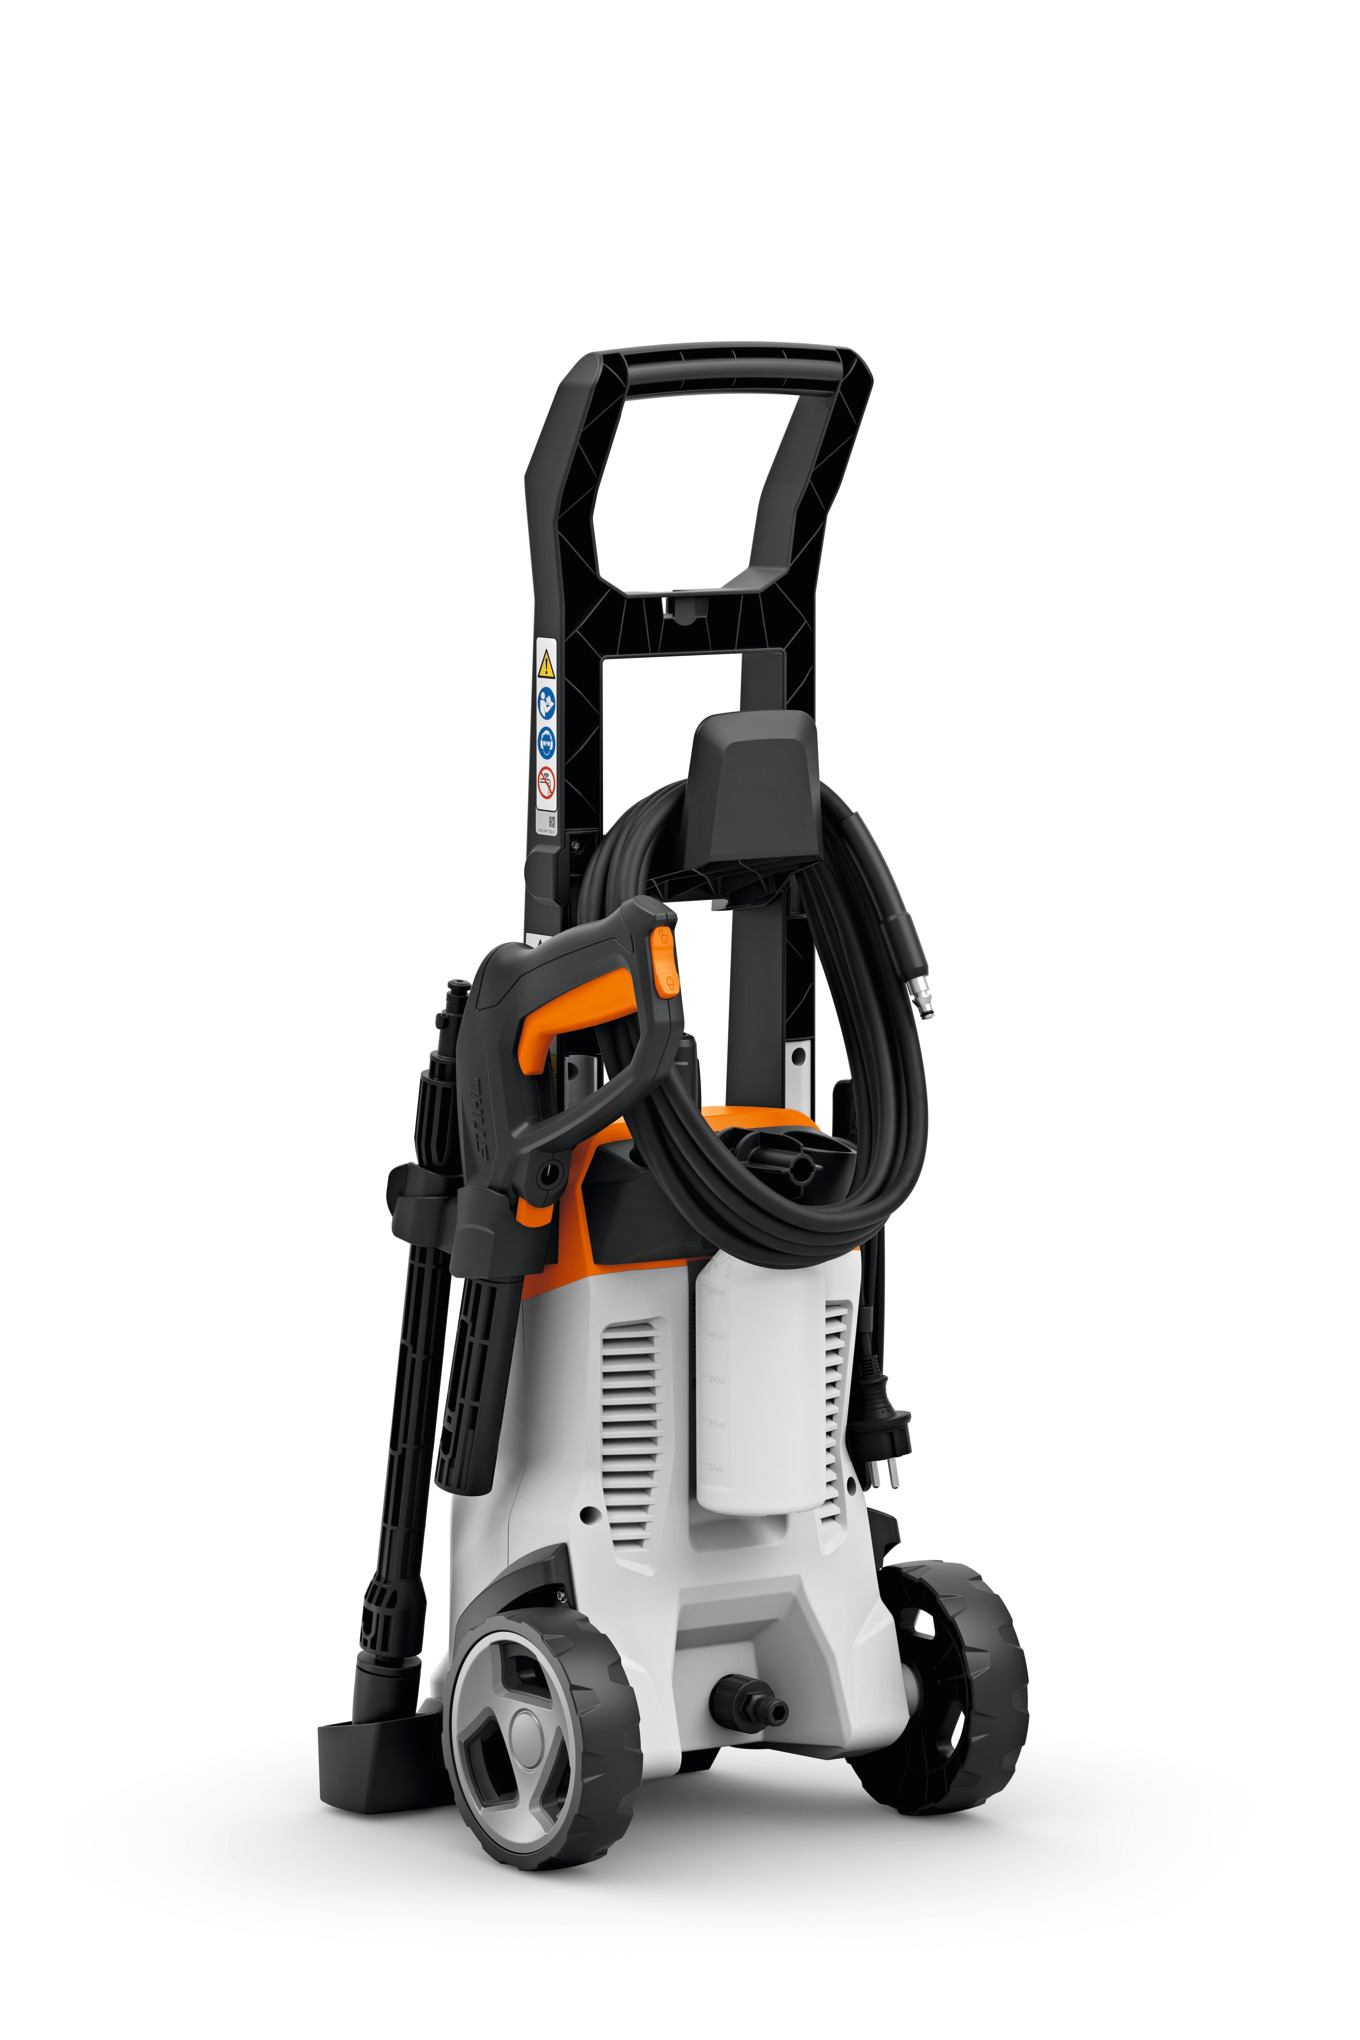 RE 90 Electric Pressure Washer